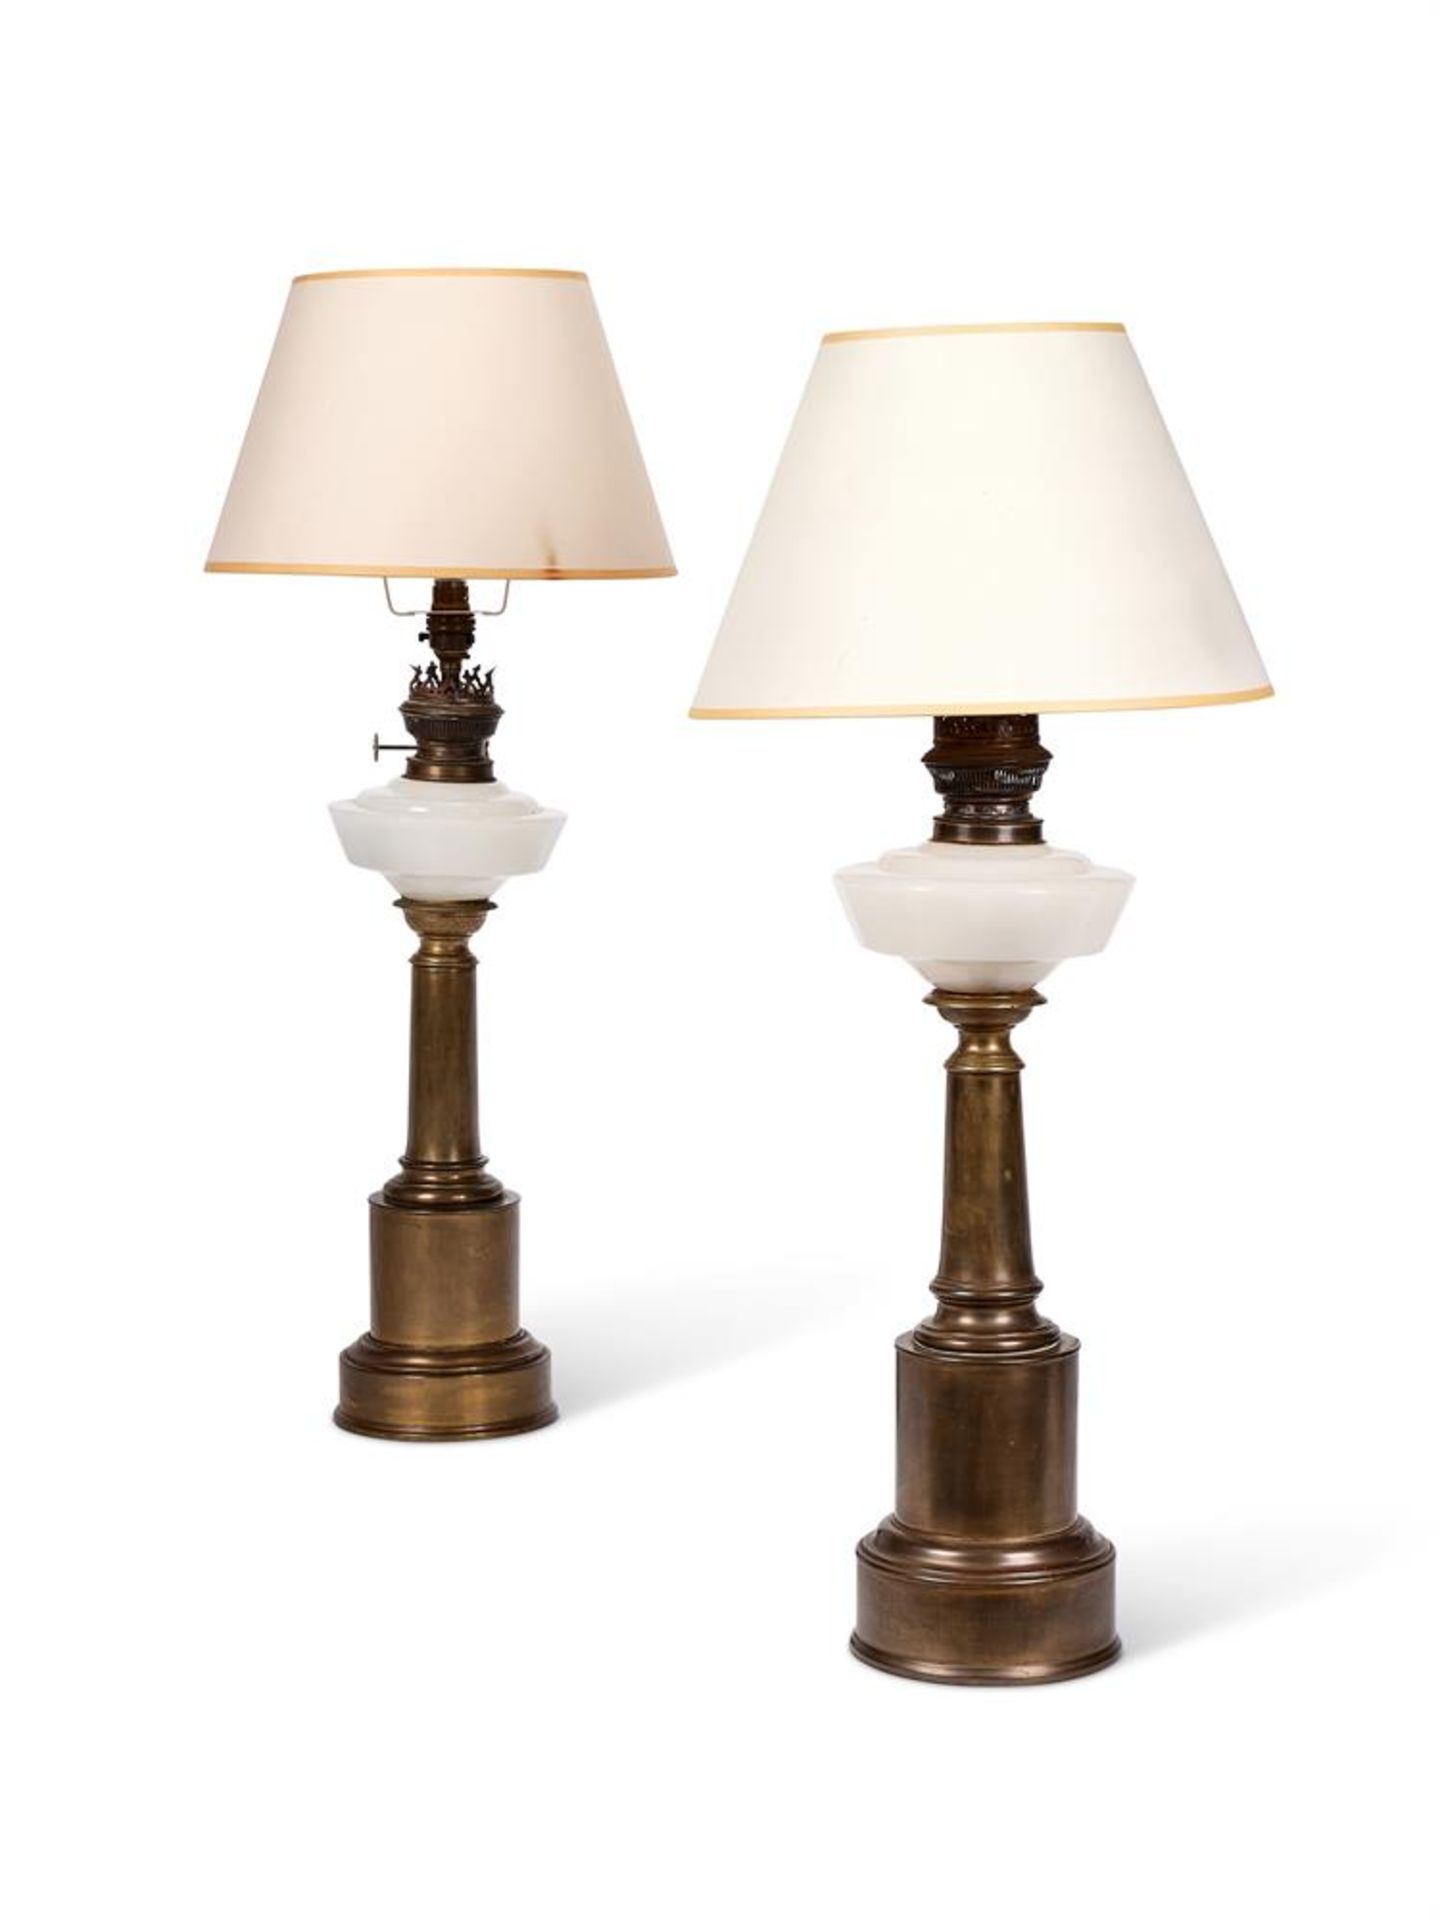 A PAIR OF COLUMNAR BRASS AND OPAQUE GLASS OIL LAMP BASES, LATE 19TH CENTURY AND LATER